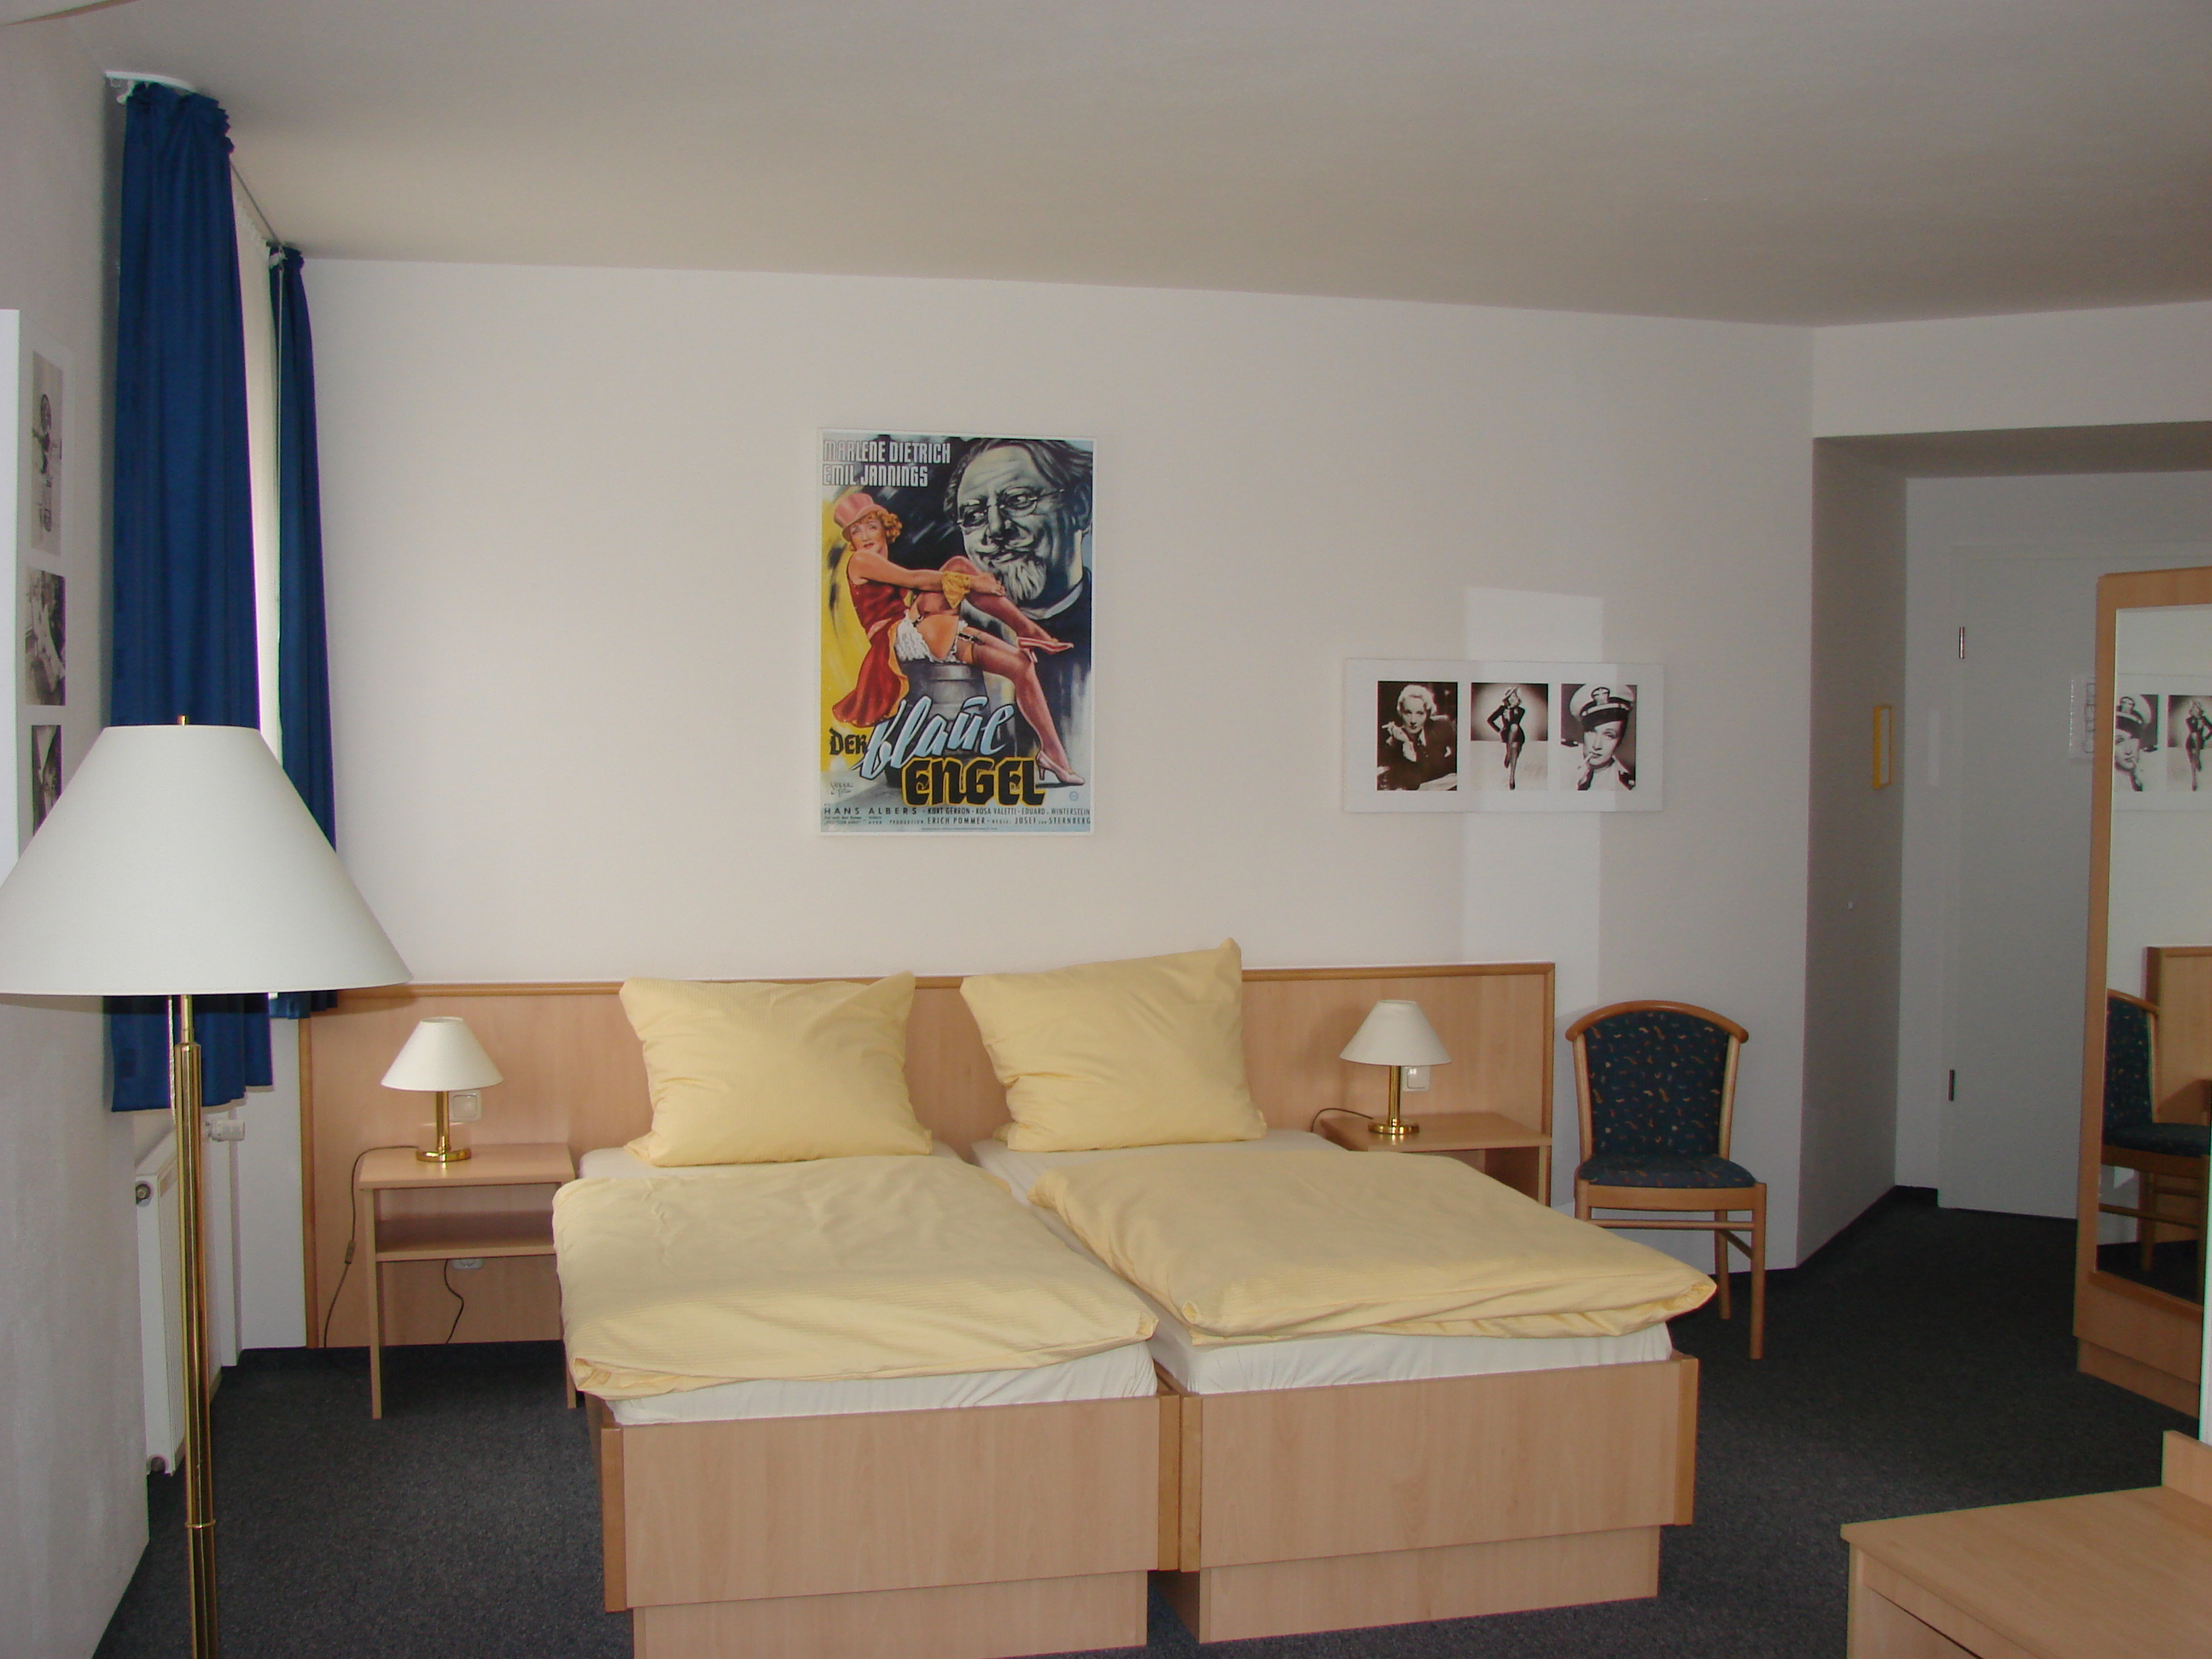 Filmhotel Lili Marleen <br/>96.00 ew <br/> <a href='http://vakantieoplossing.nl/outpage/?id=634217caf6dc1c463532dc0f63a61291' target='_blank'>View Details</a>